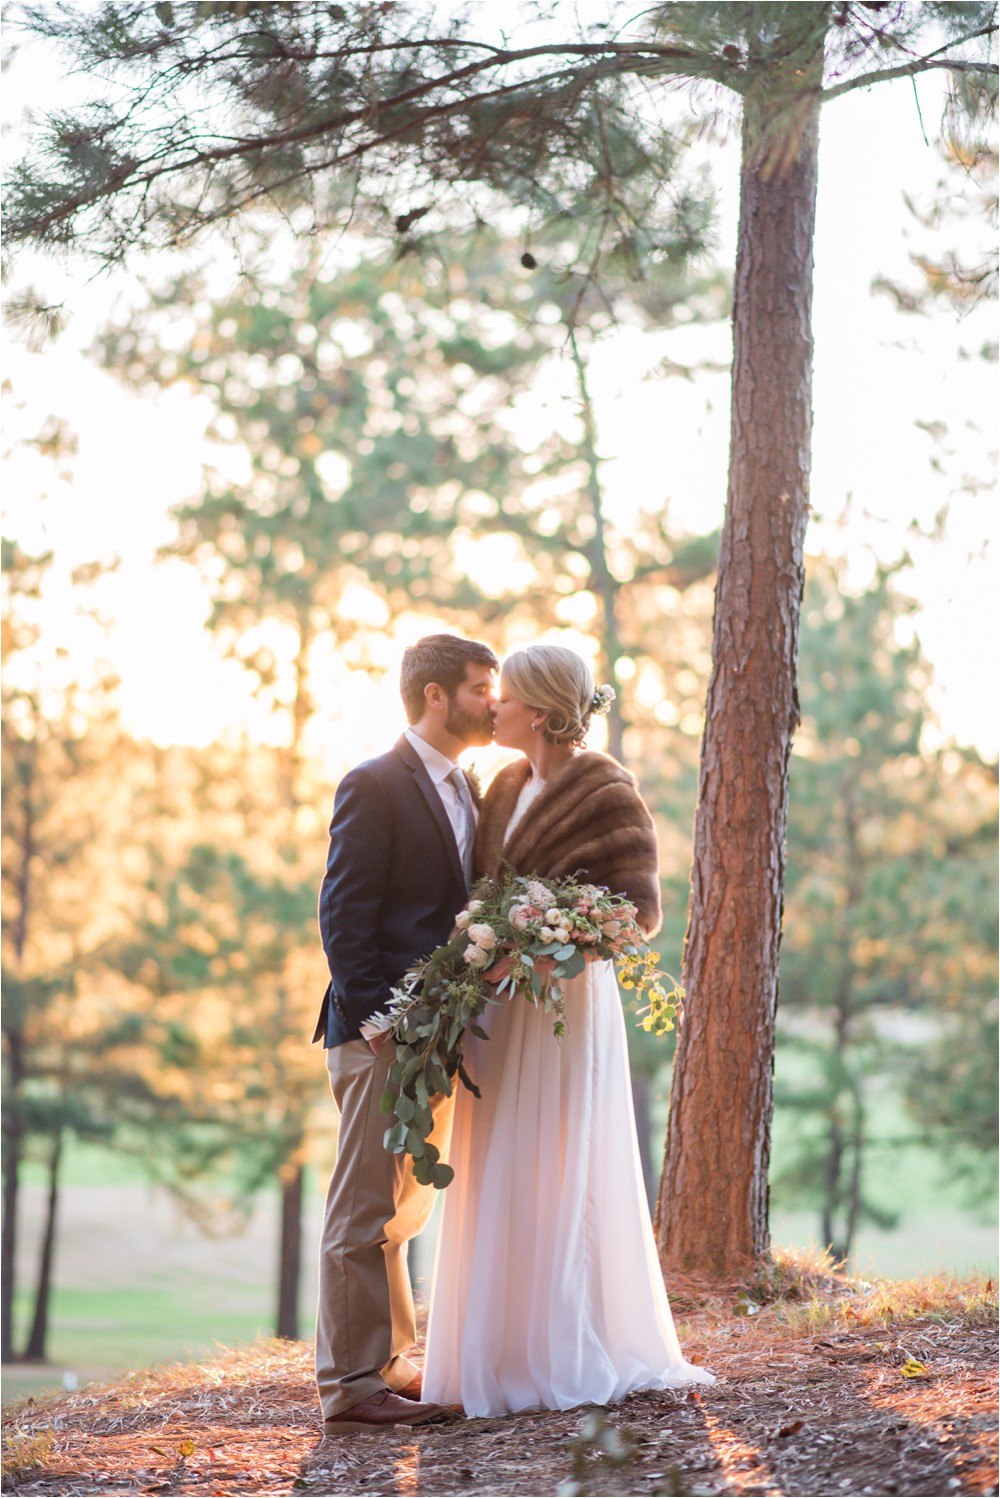 intimate-outdoor-wedding-at-home-in-columbus-georgia-by-eliza-morrill-photography_0053